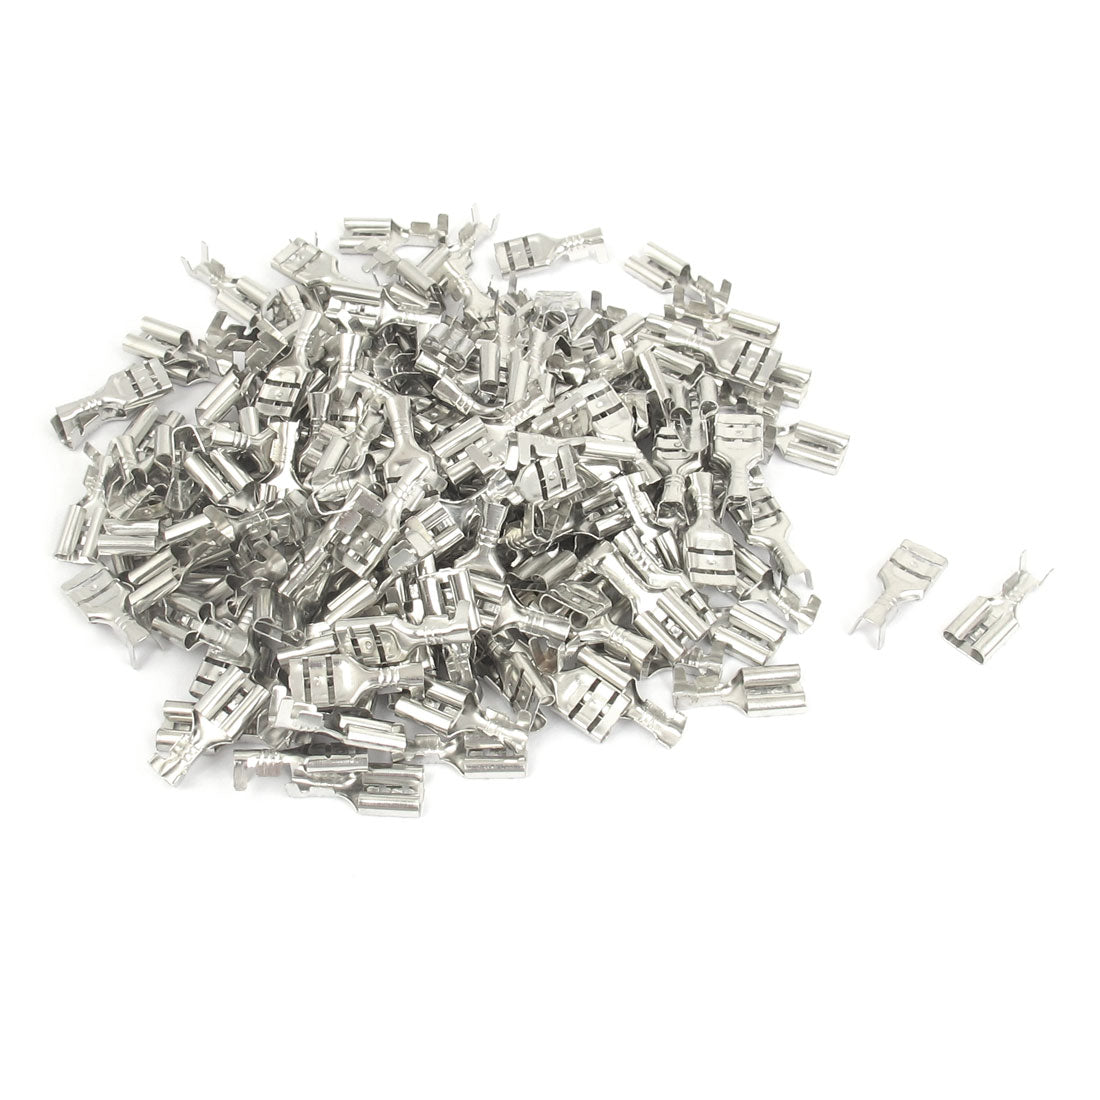 uxcell Uxcell Car Speaker 6.3mm Female Spade Terminal Wire Connector Silver Tone 200pcs